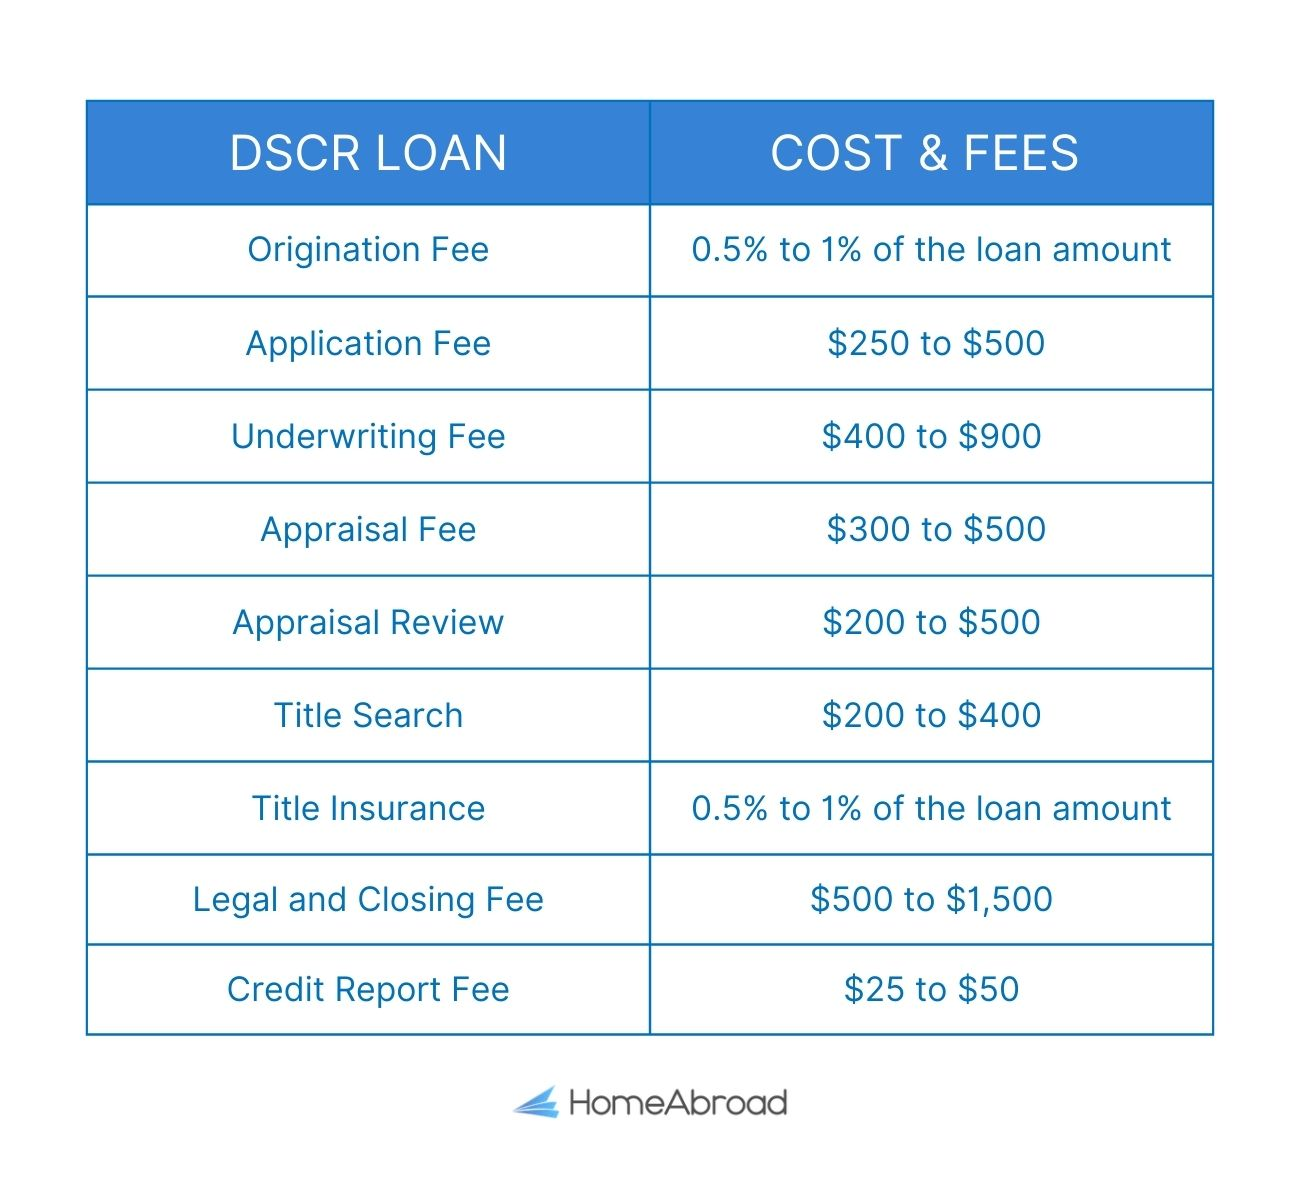 Cost and fees associated with dscr loan louisiana